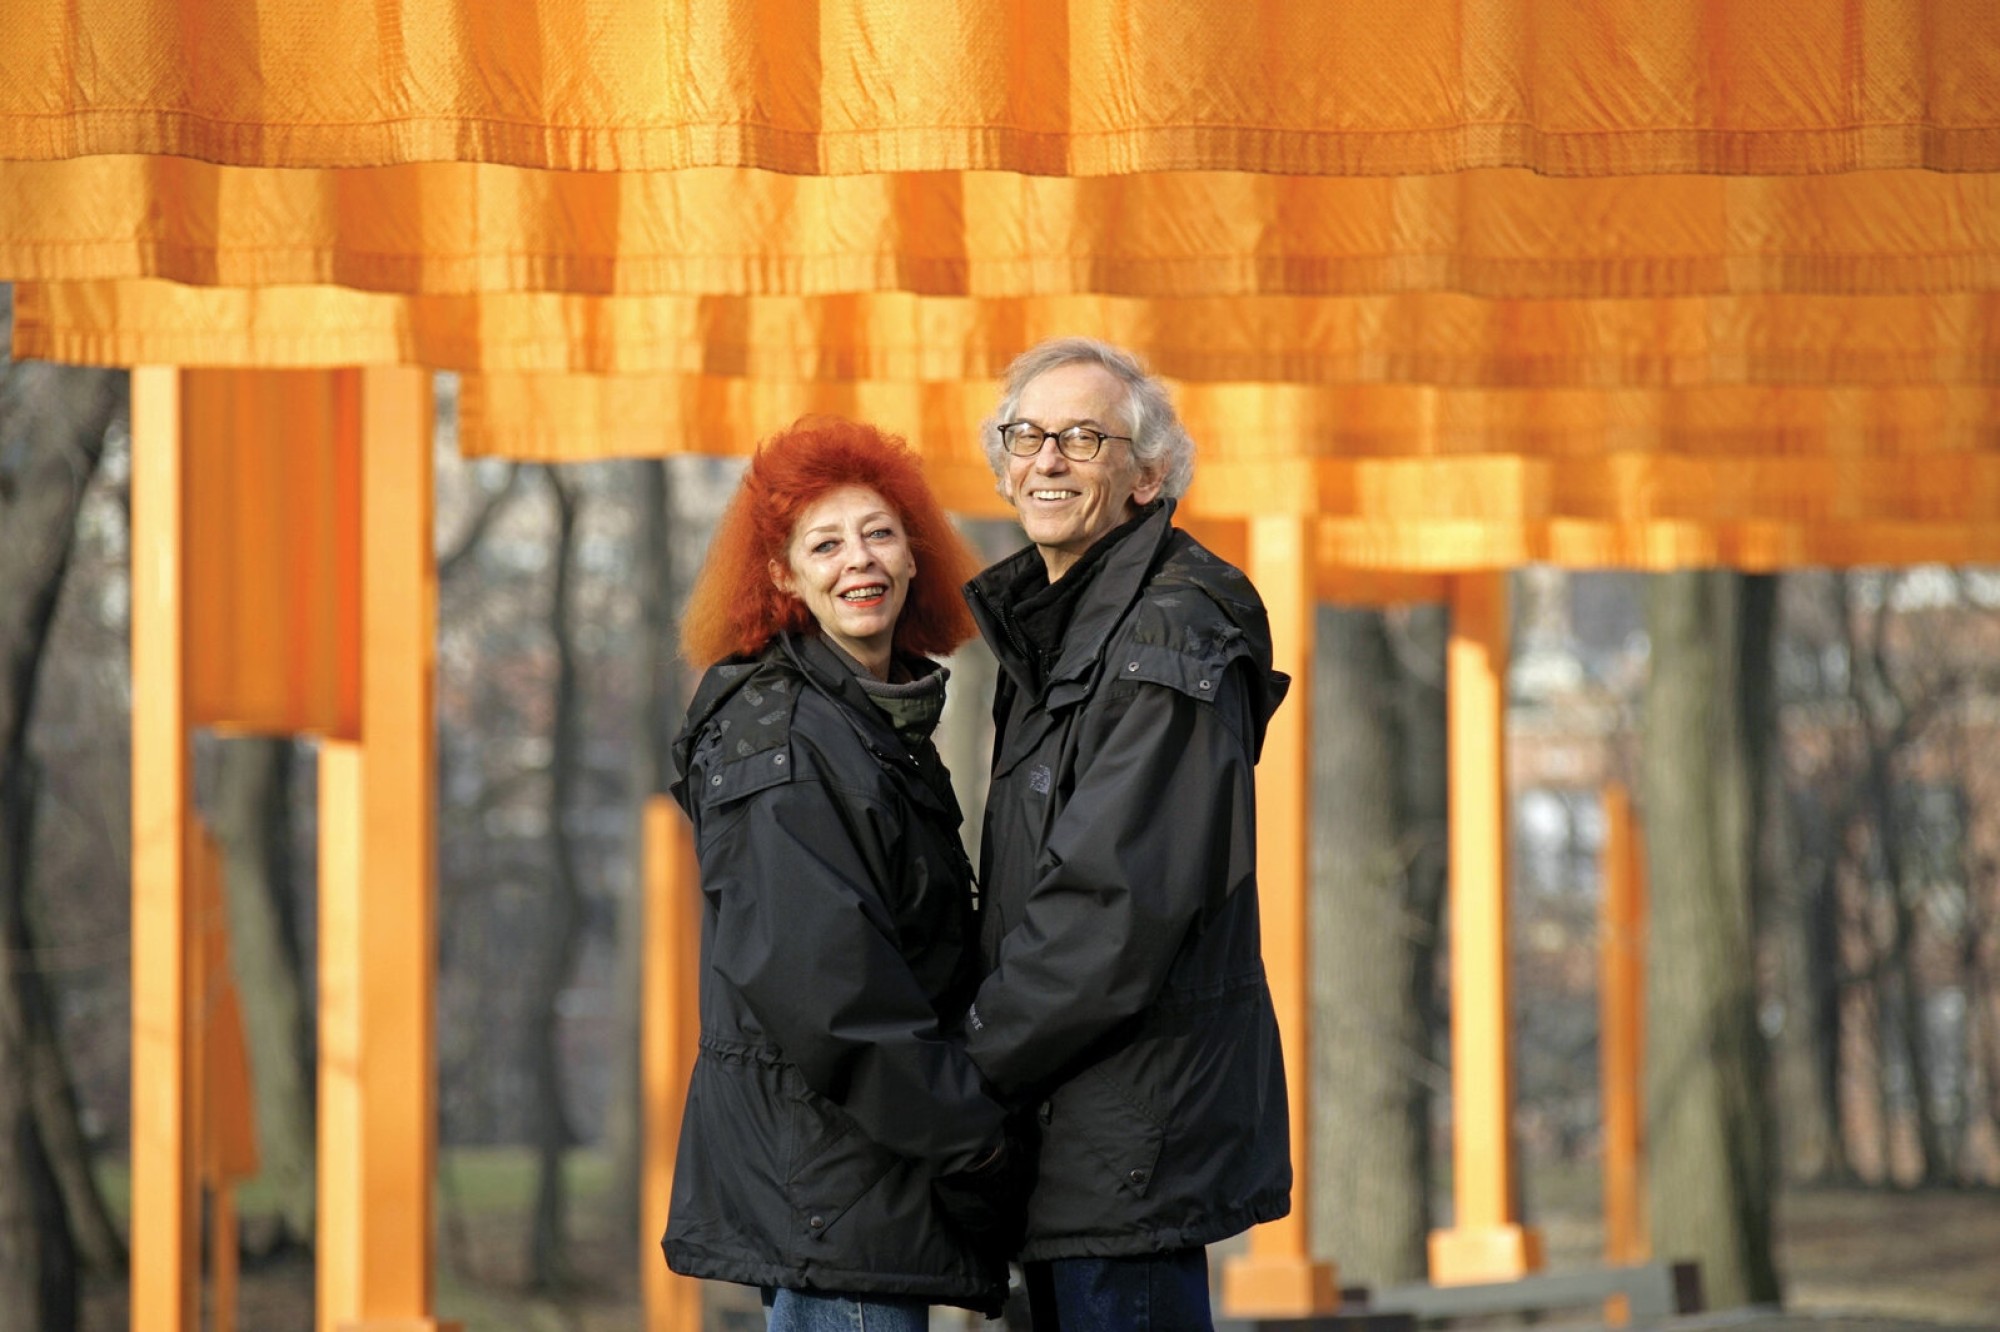 Christo and Jeanne-Claude in New York City, 2005 Wofgang Volz ©2005 Christo and Jeanne-Claude Foundation title=